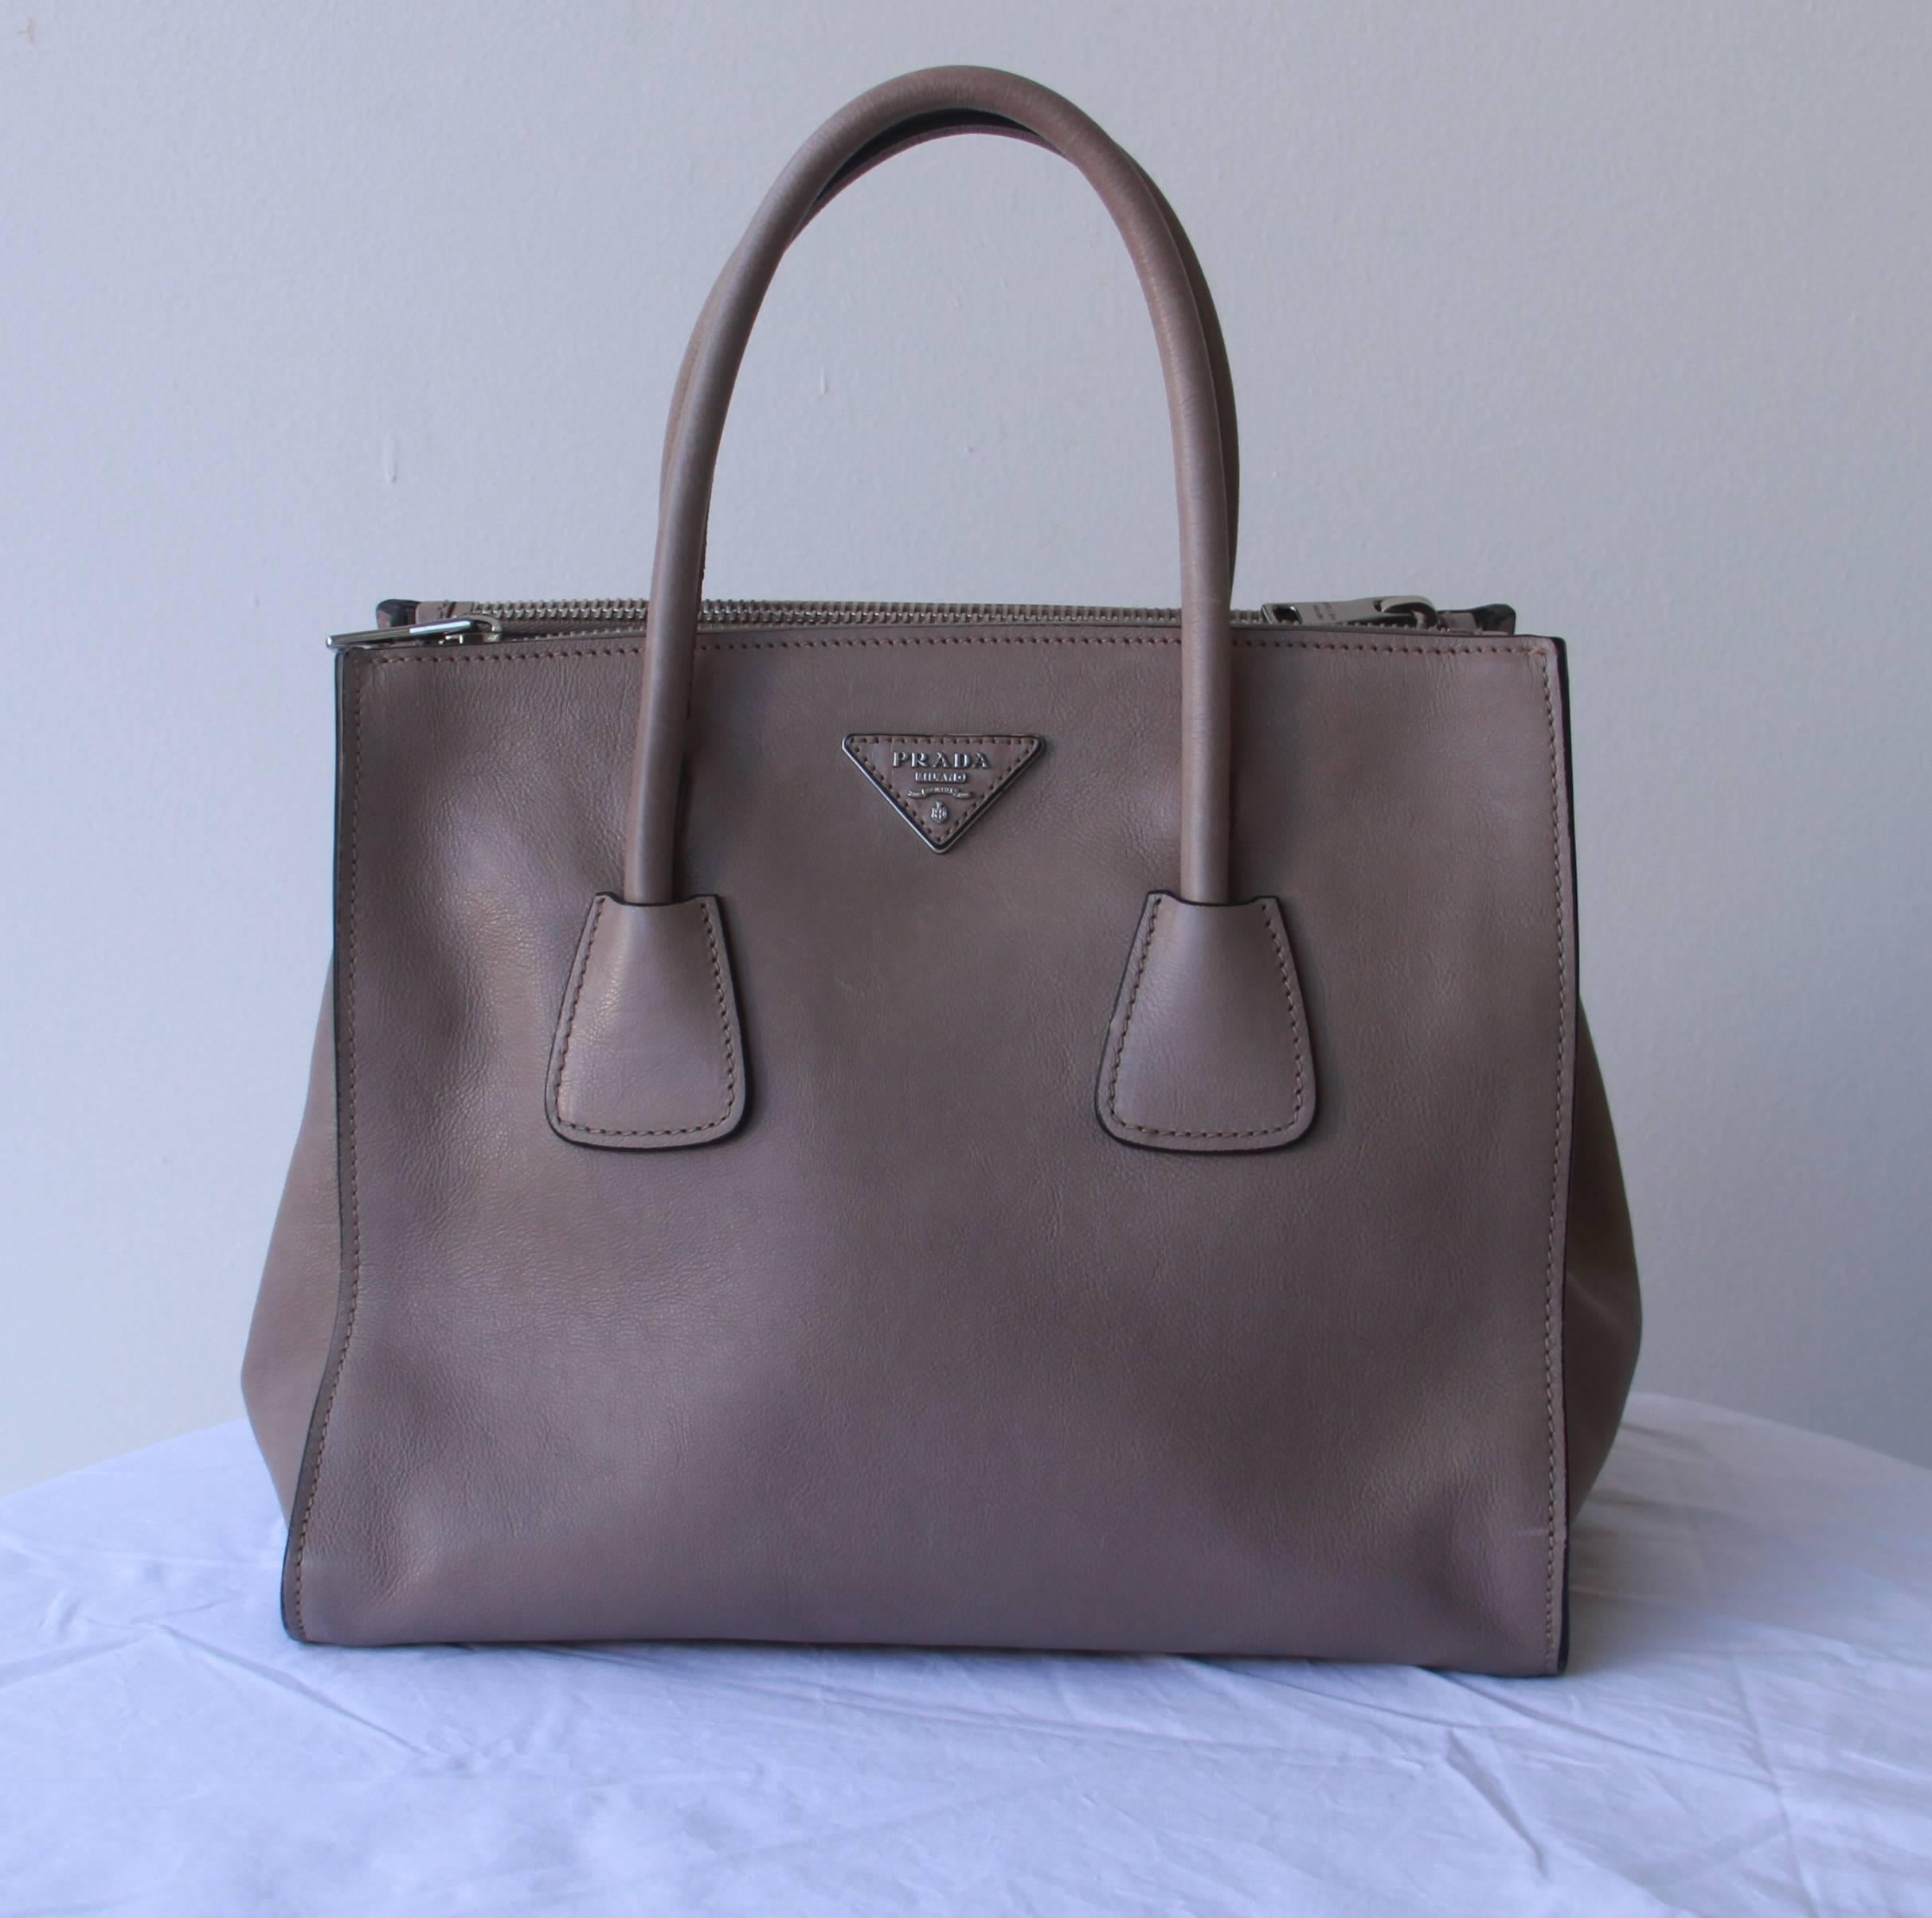 Recent Prada bag from 2014.

The bag is new with the original tags.